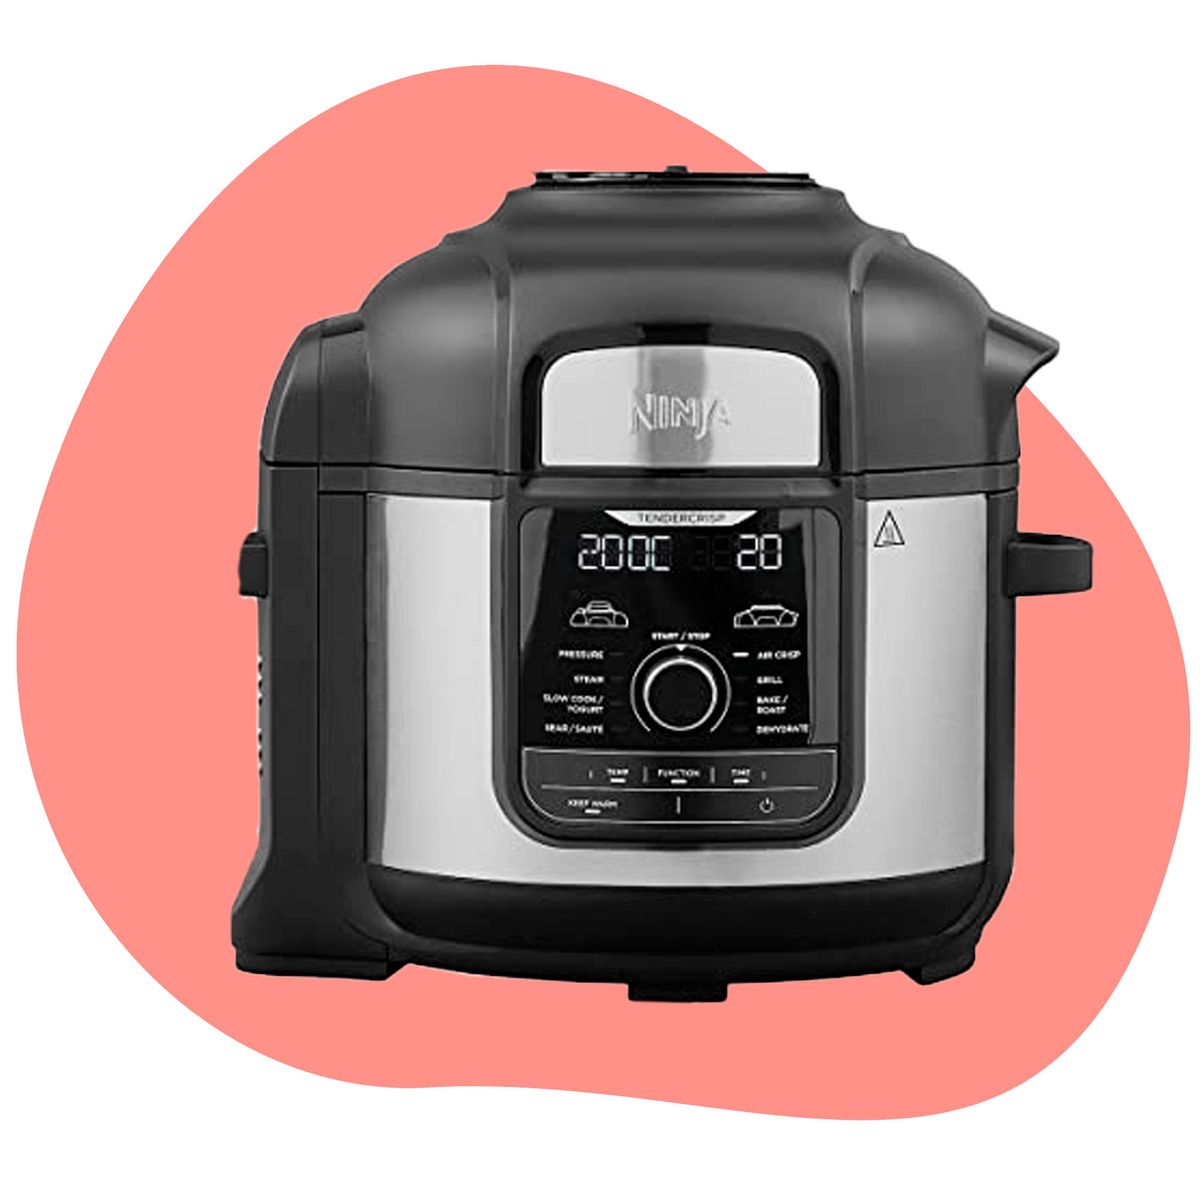 Ninja Foodi 9-in-1 Multi-Cooker tried & tested review - Your Home